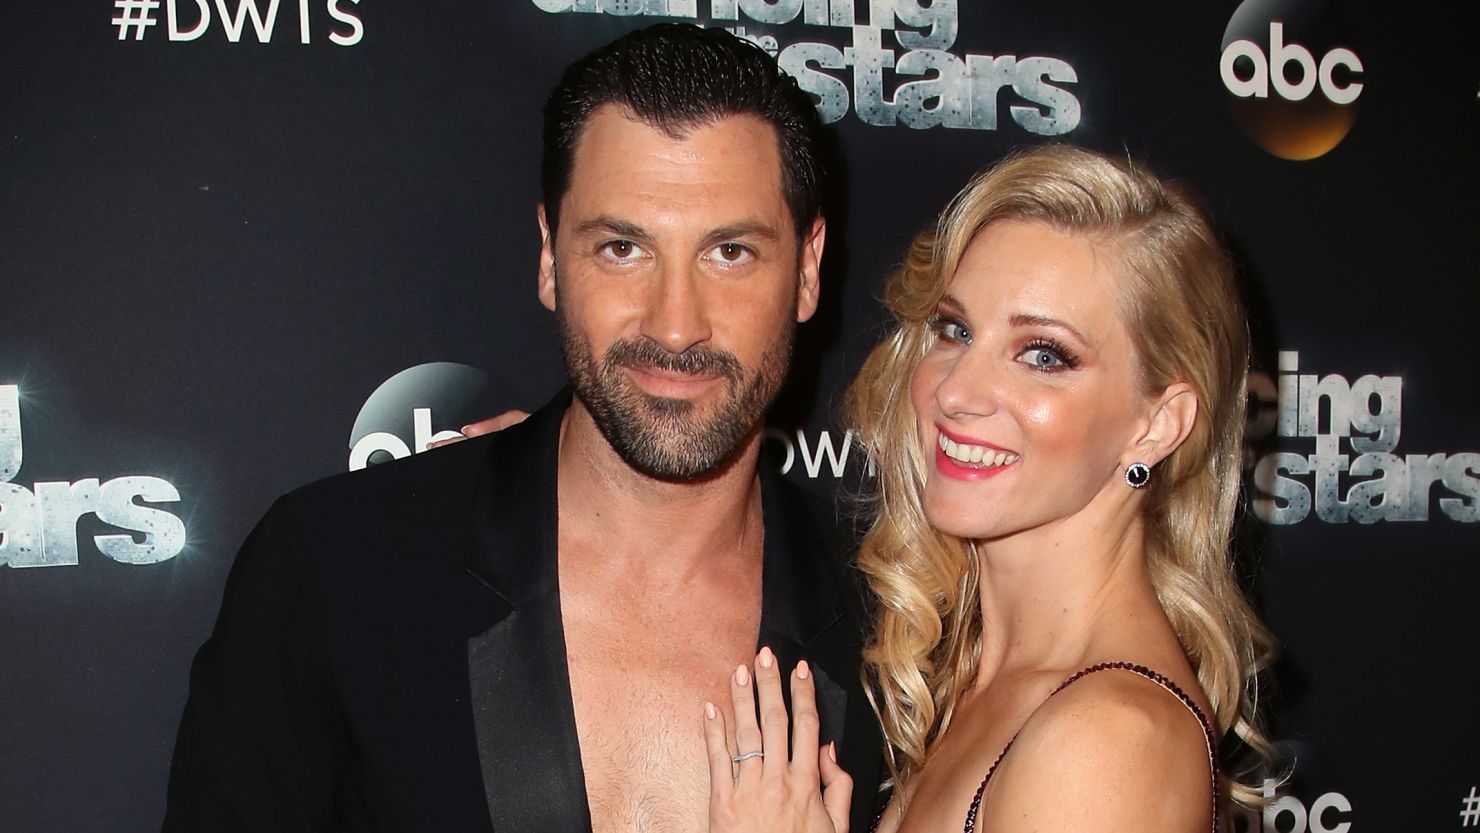 Actress Heather Morris (R) and dancer Maksim Chmerkovskiy attend "Dancing with the Stars" Season 24 at CBS Televison City on April 24, 2017 in Los Angeles, California. 